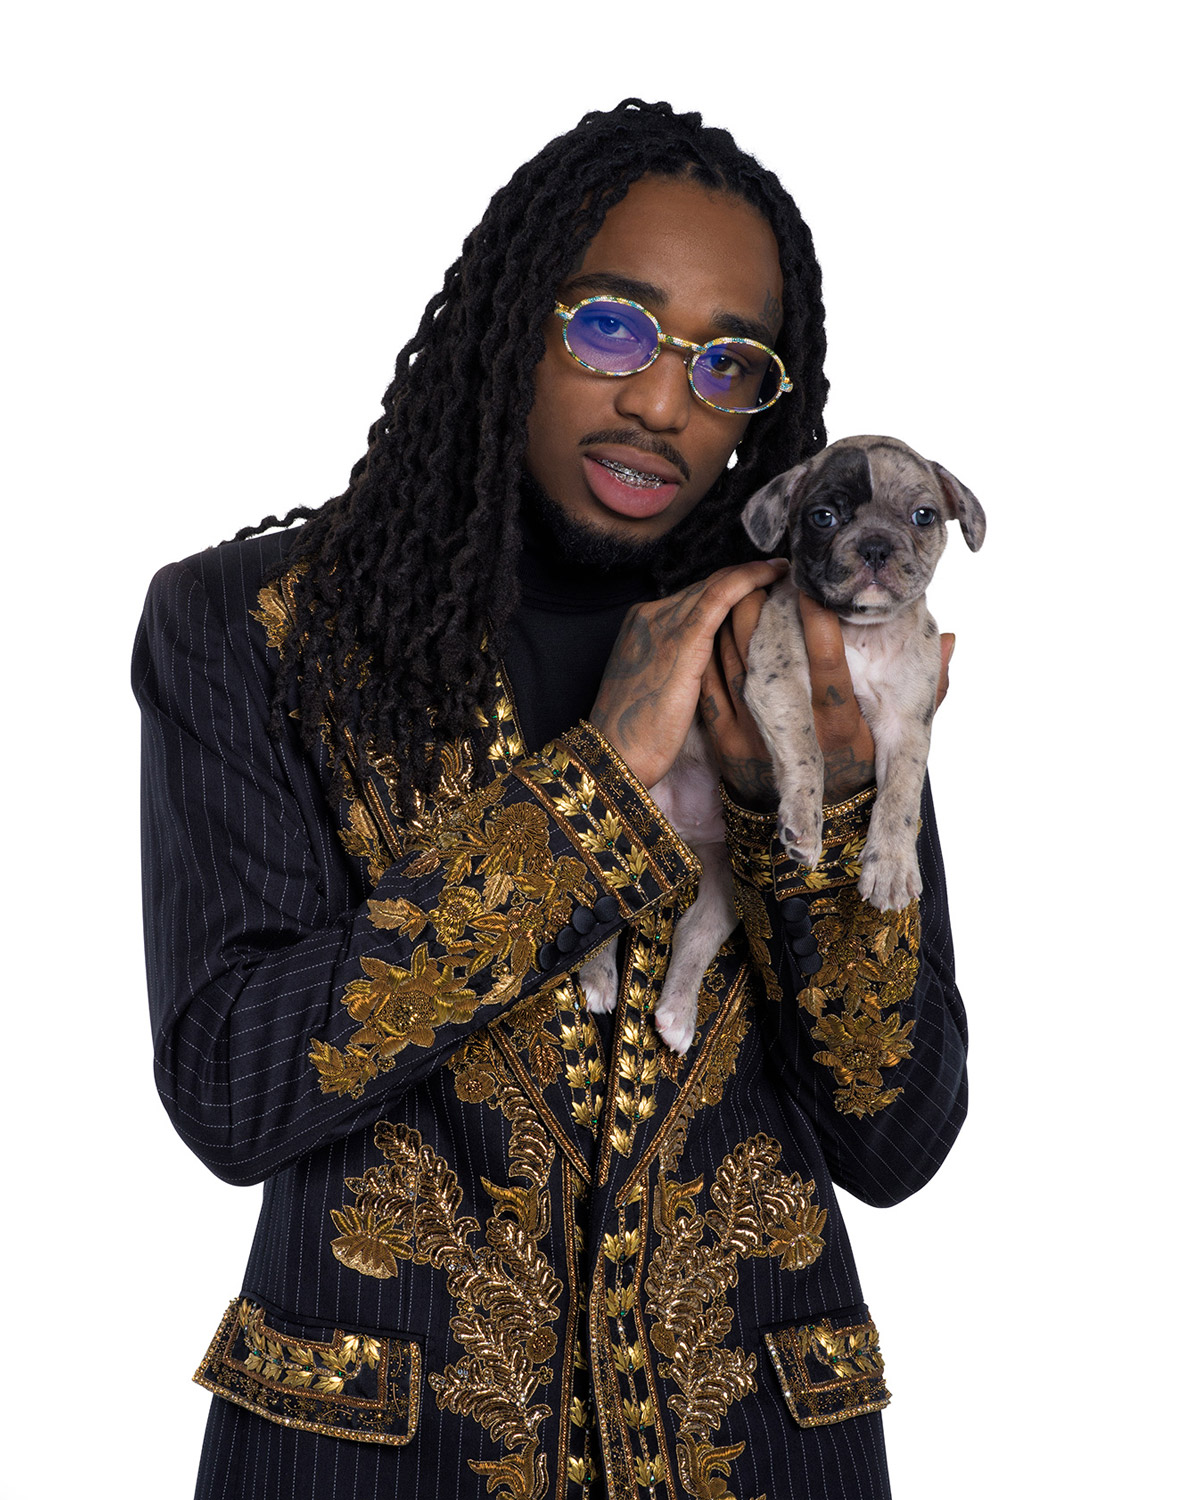 Quavo Talks Icing Out Braves Fitted for Lids Collab, 'Culture 3'  Expectations, Migos Critics, and More 